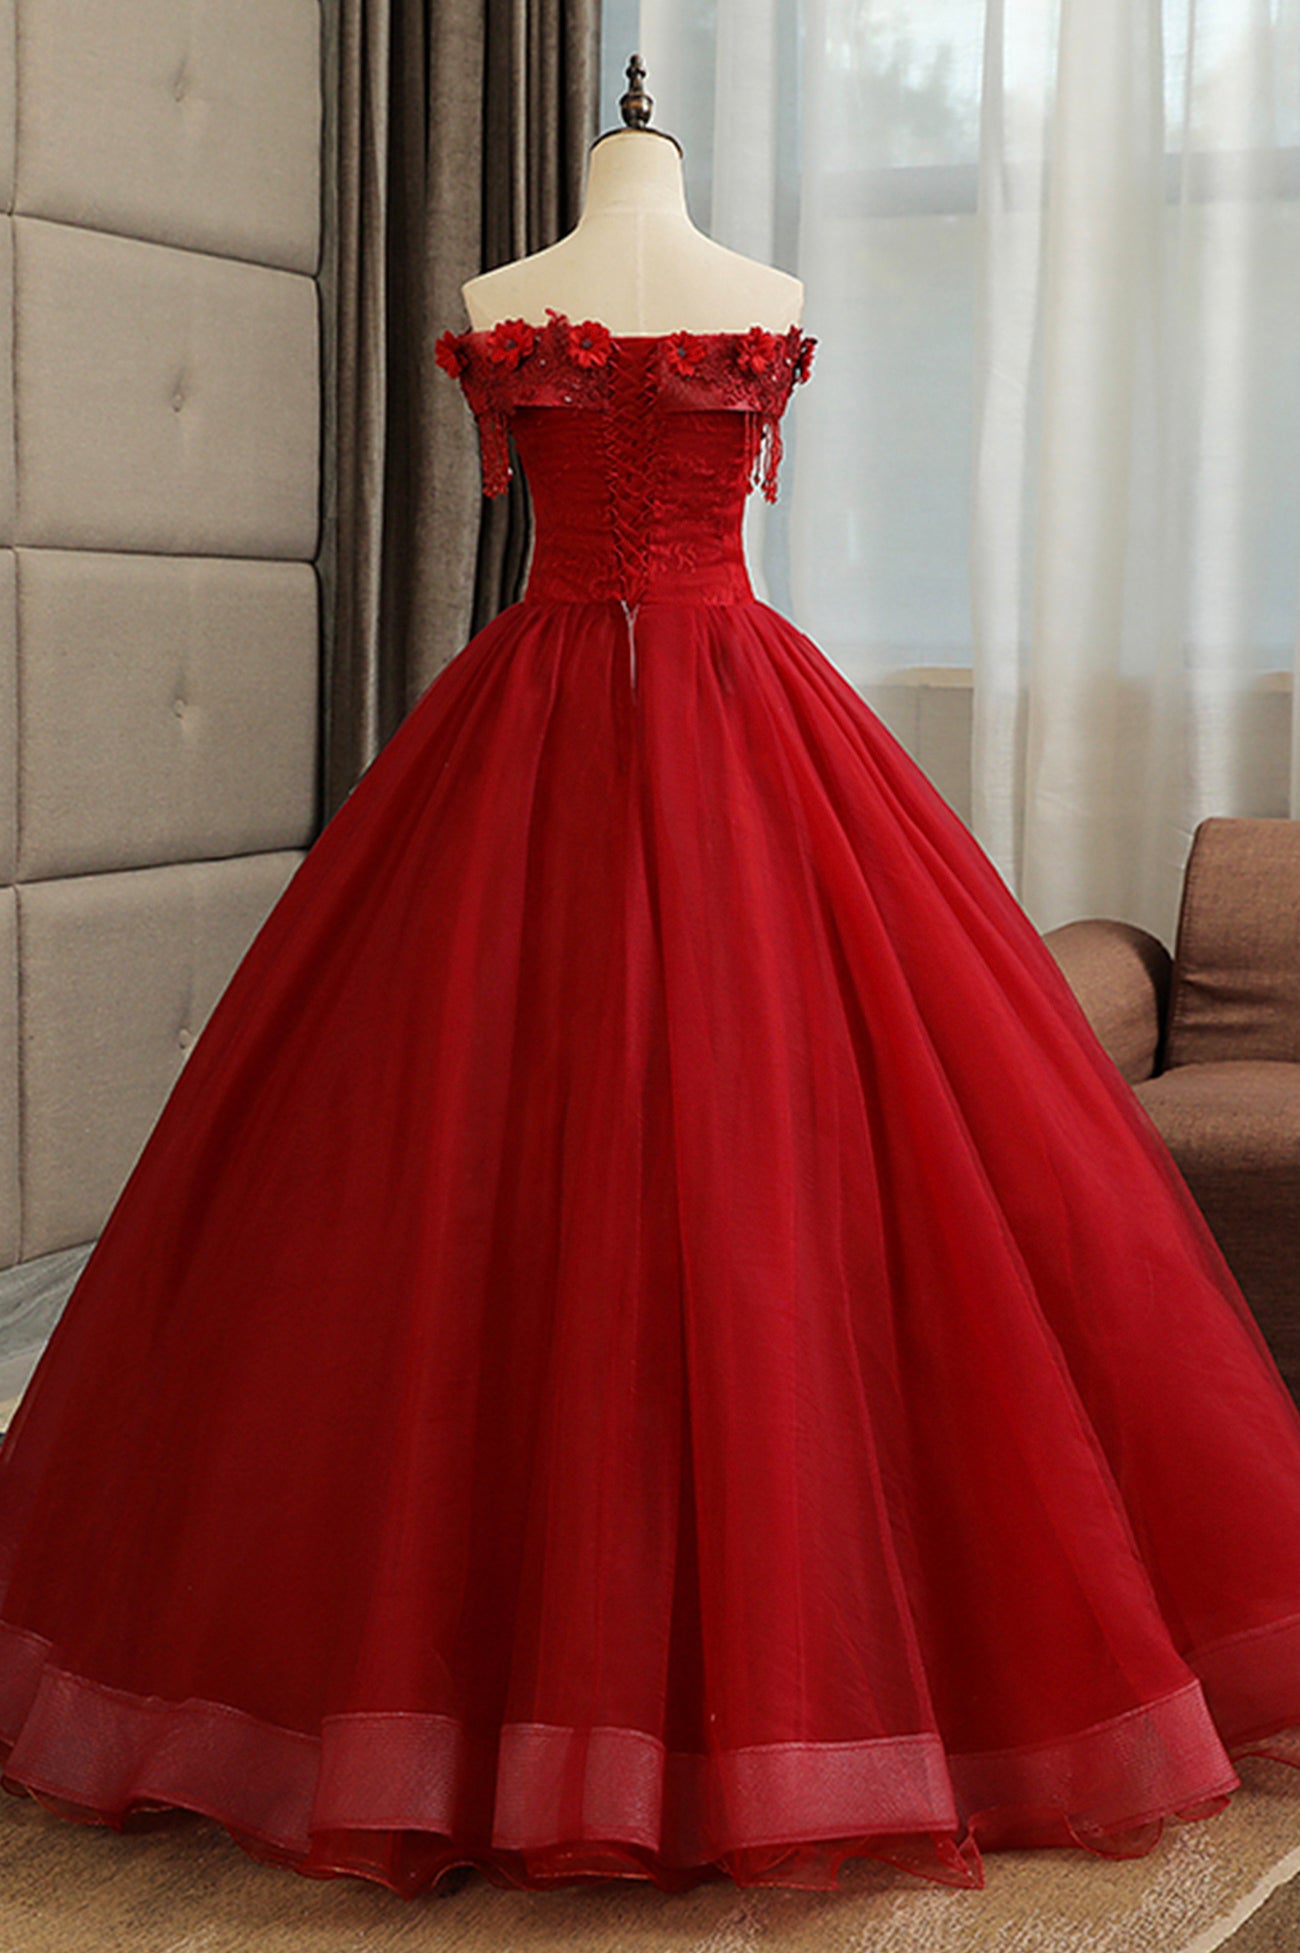 Burgundy Tulle Lace Long Prom Dress, Burgundy A-Line Evening Gown